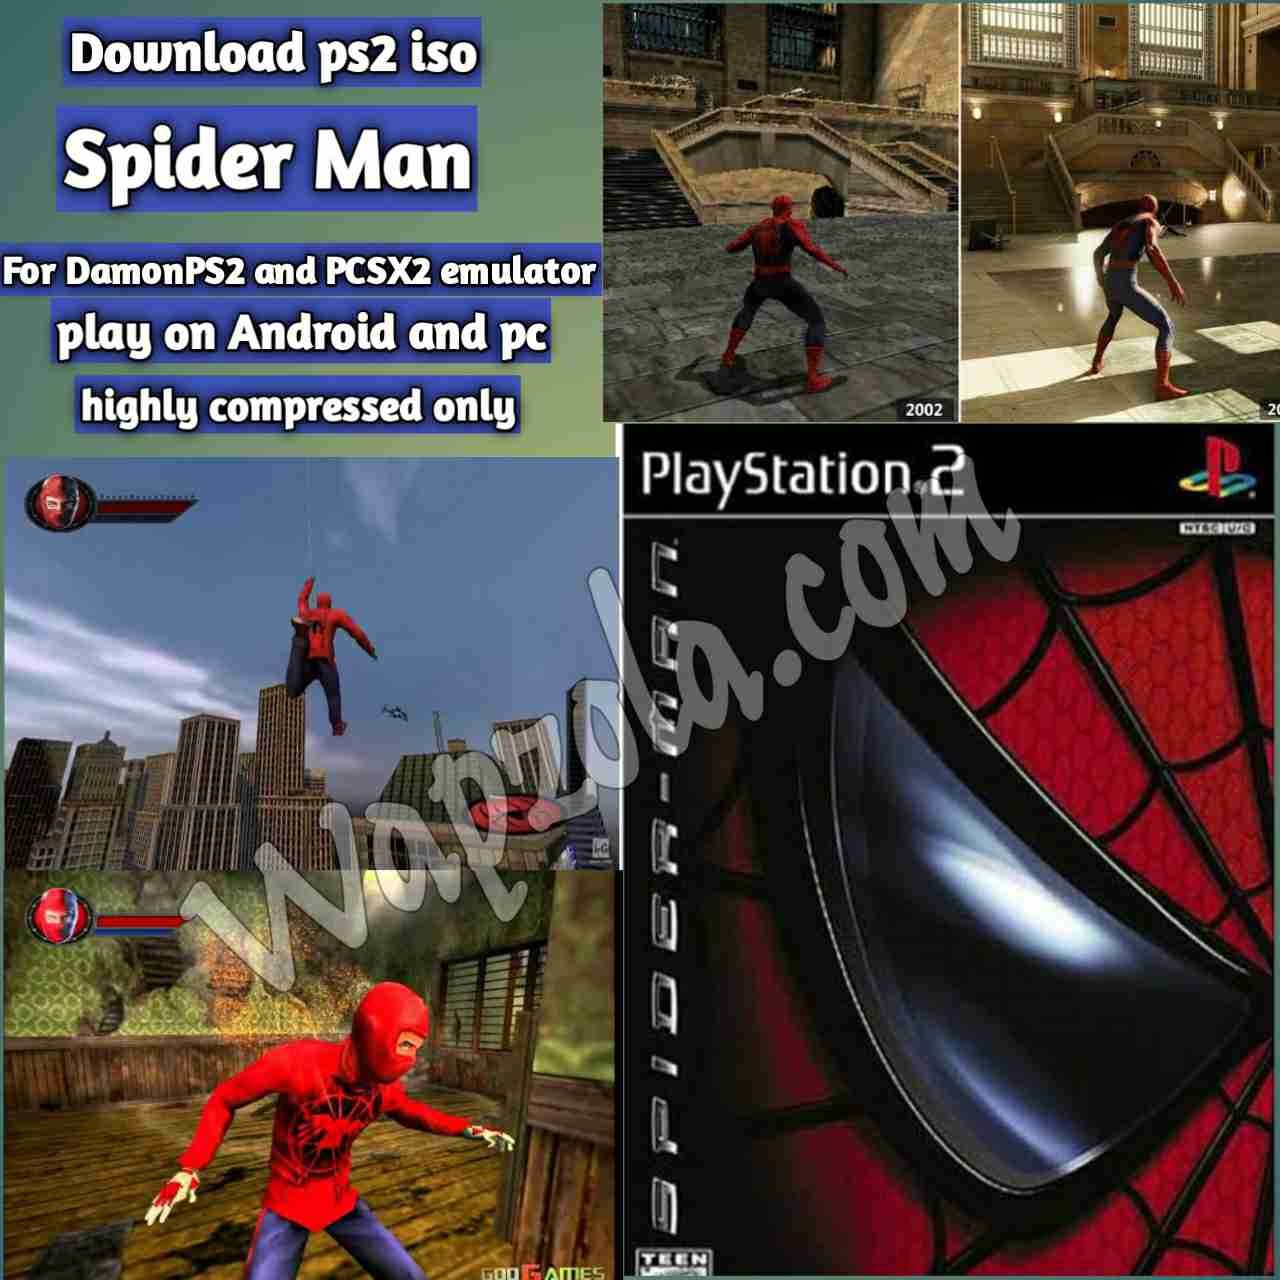 You are currently viewing [Download] Spider-Man DamonPS2 and PCSX2 emulator – PS2 APK ISO ROM highly compressed play Android and pc